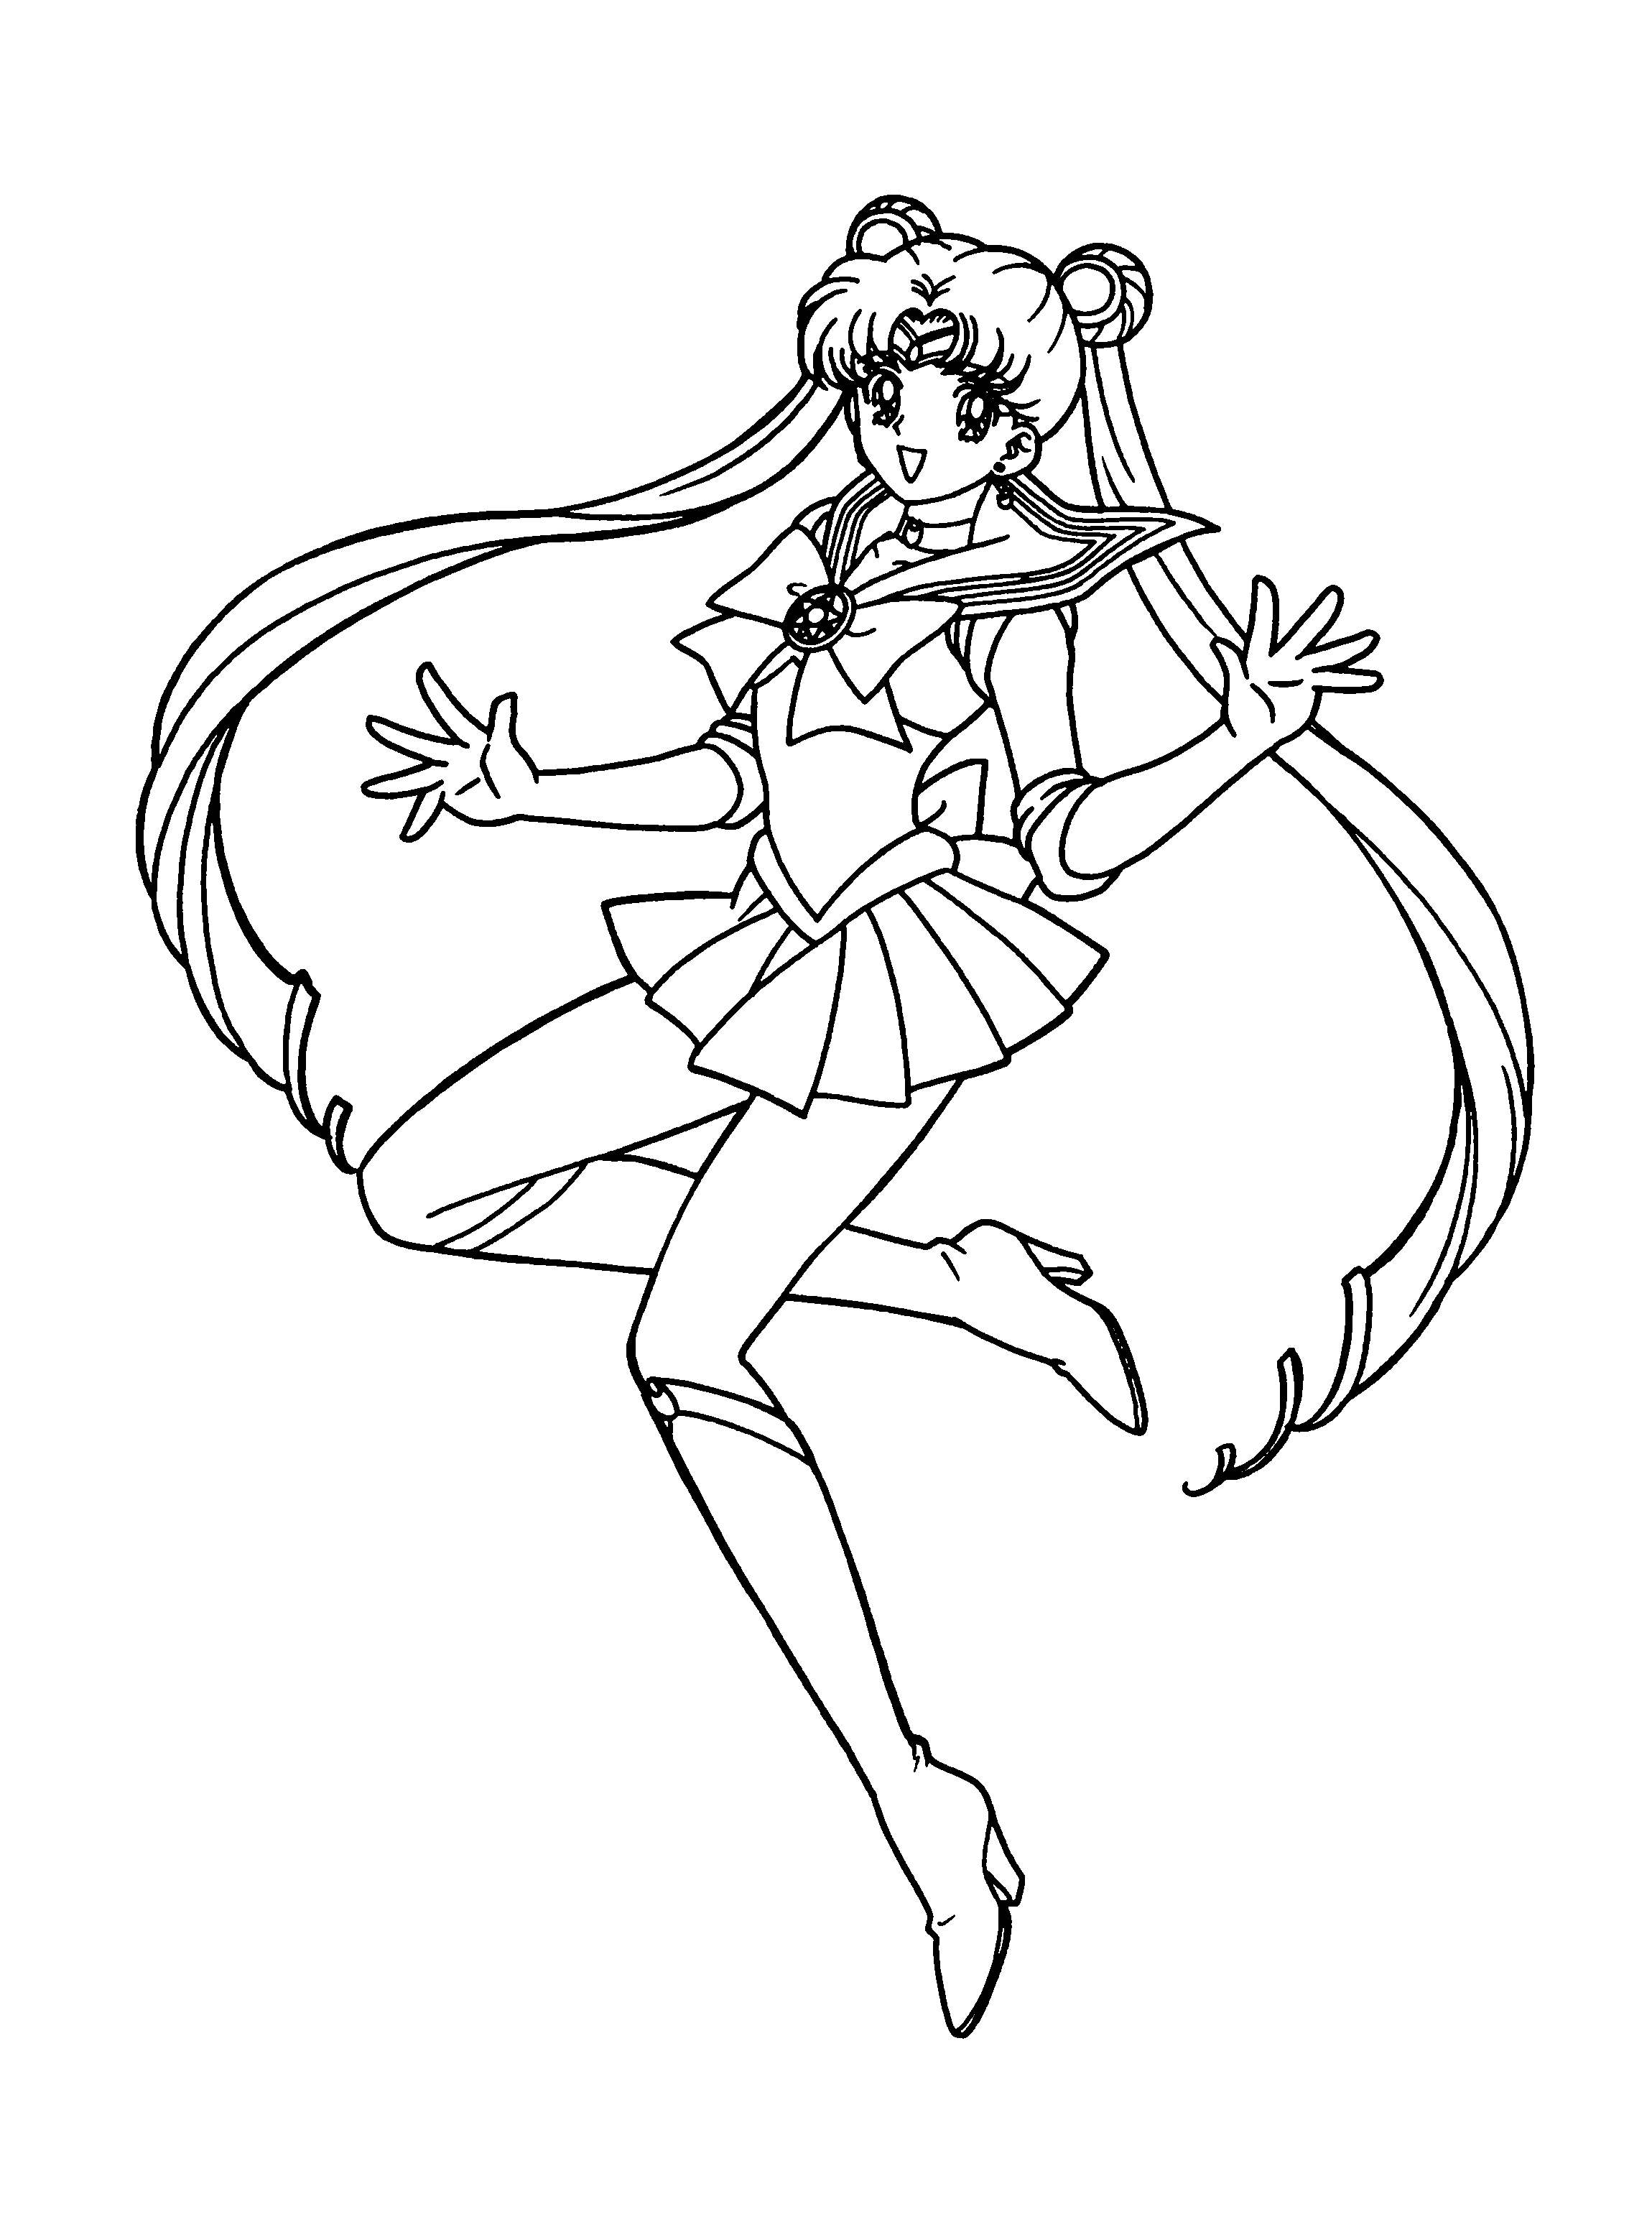 animated-coloring-pages-sailor-moon-image-0063